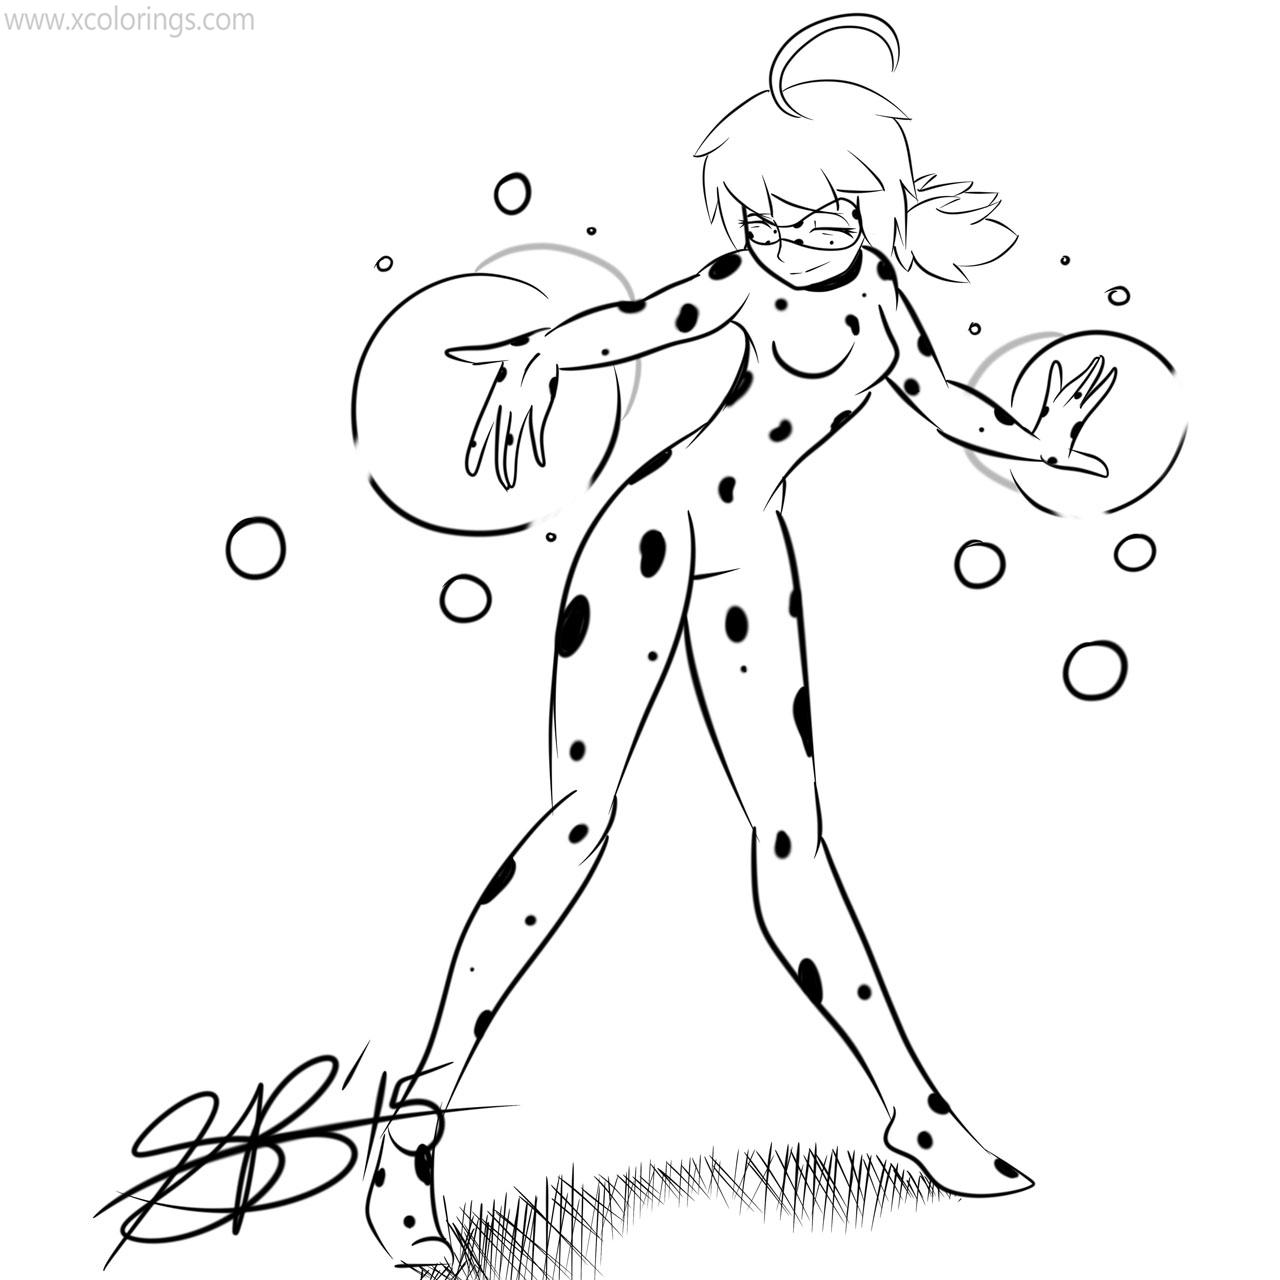 Free Miraculous Ladybug Coloring Pages Fanart printable